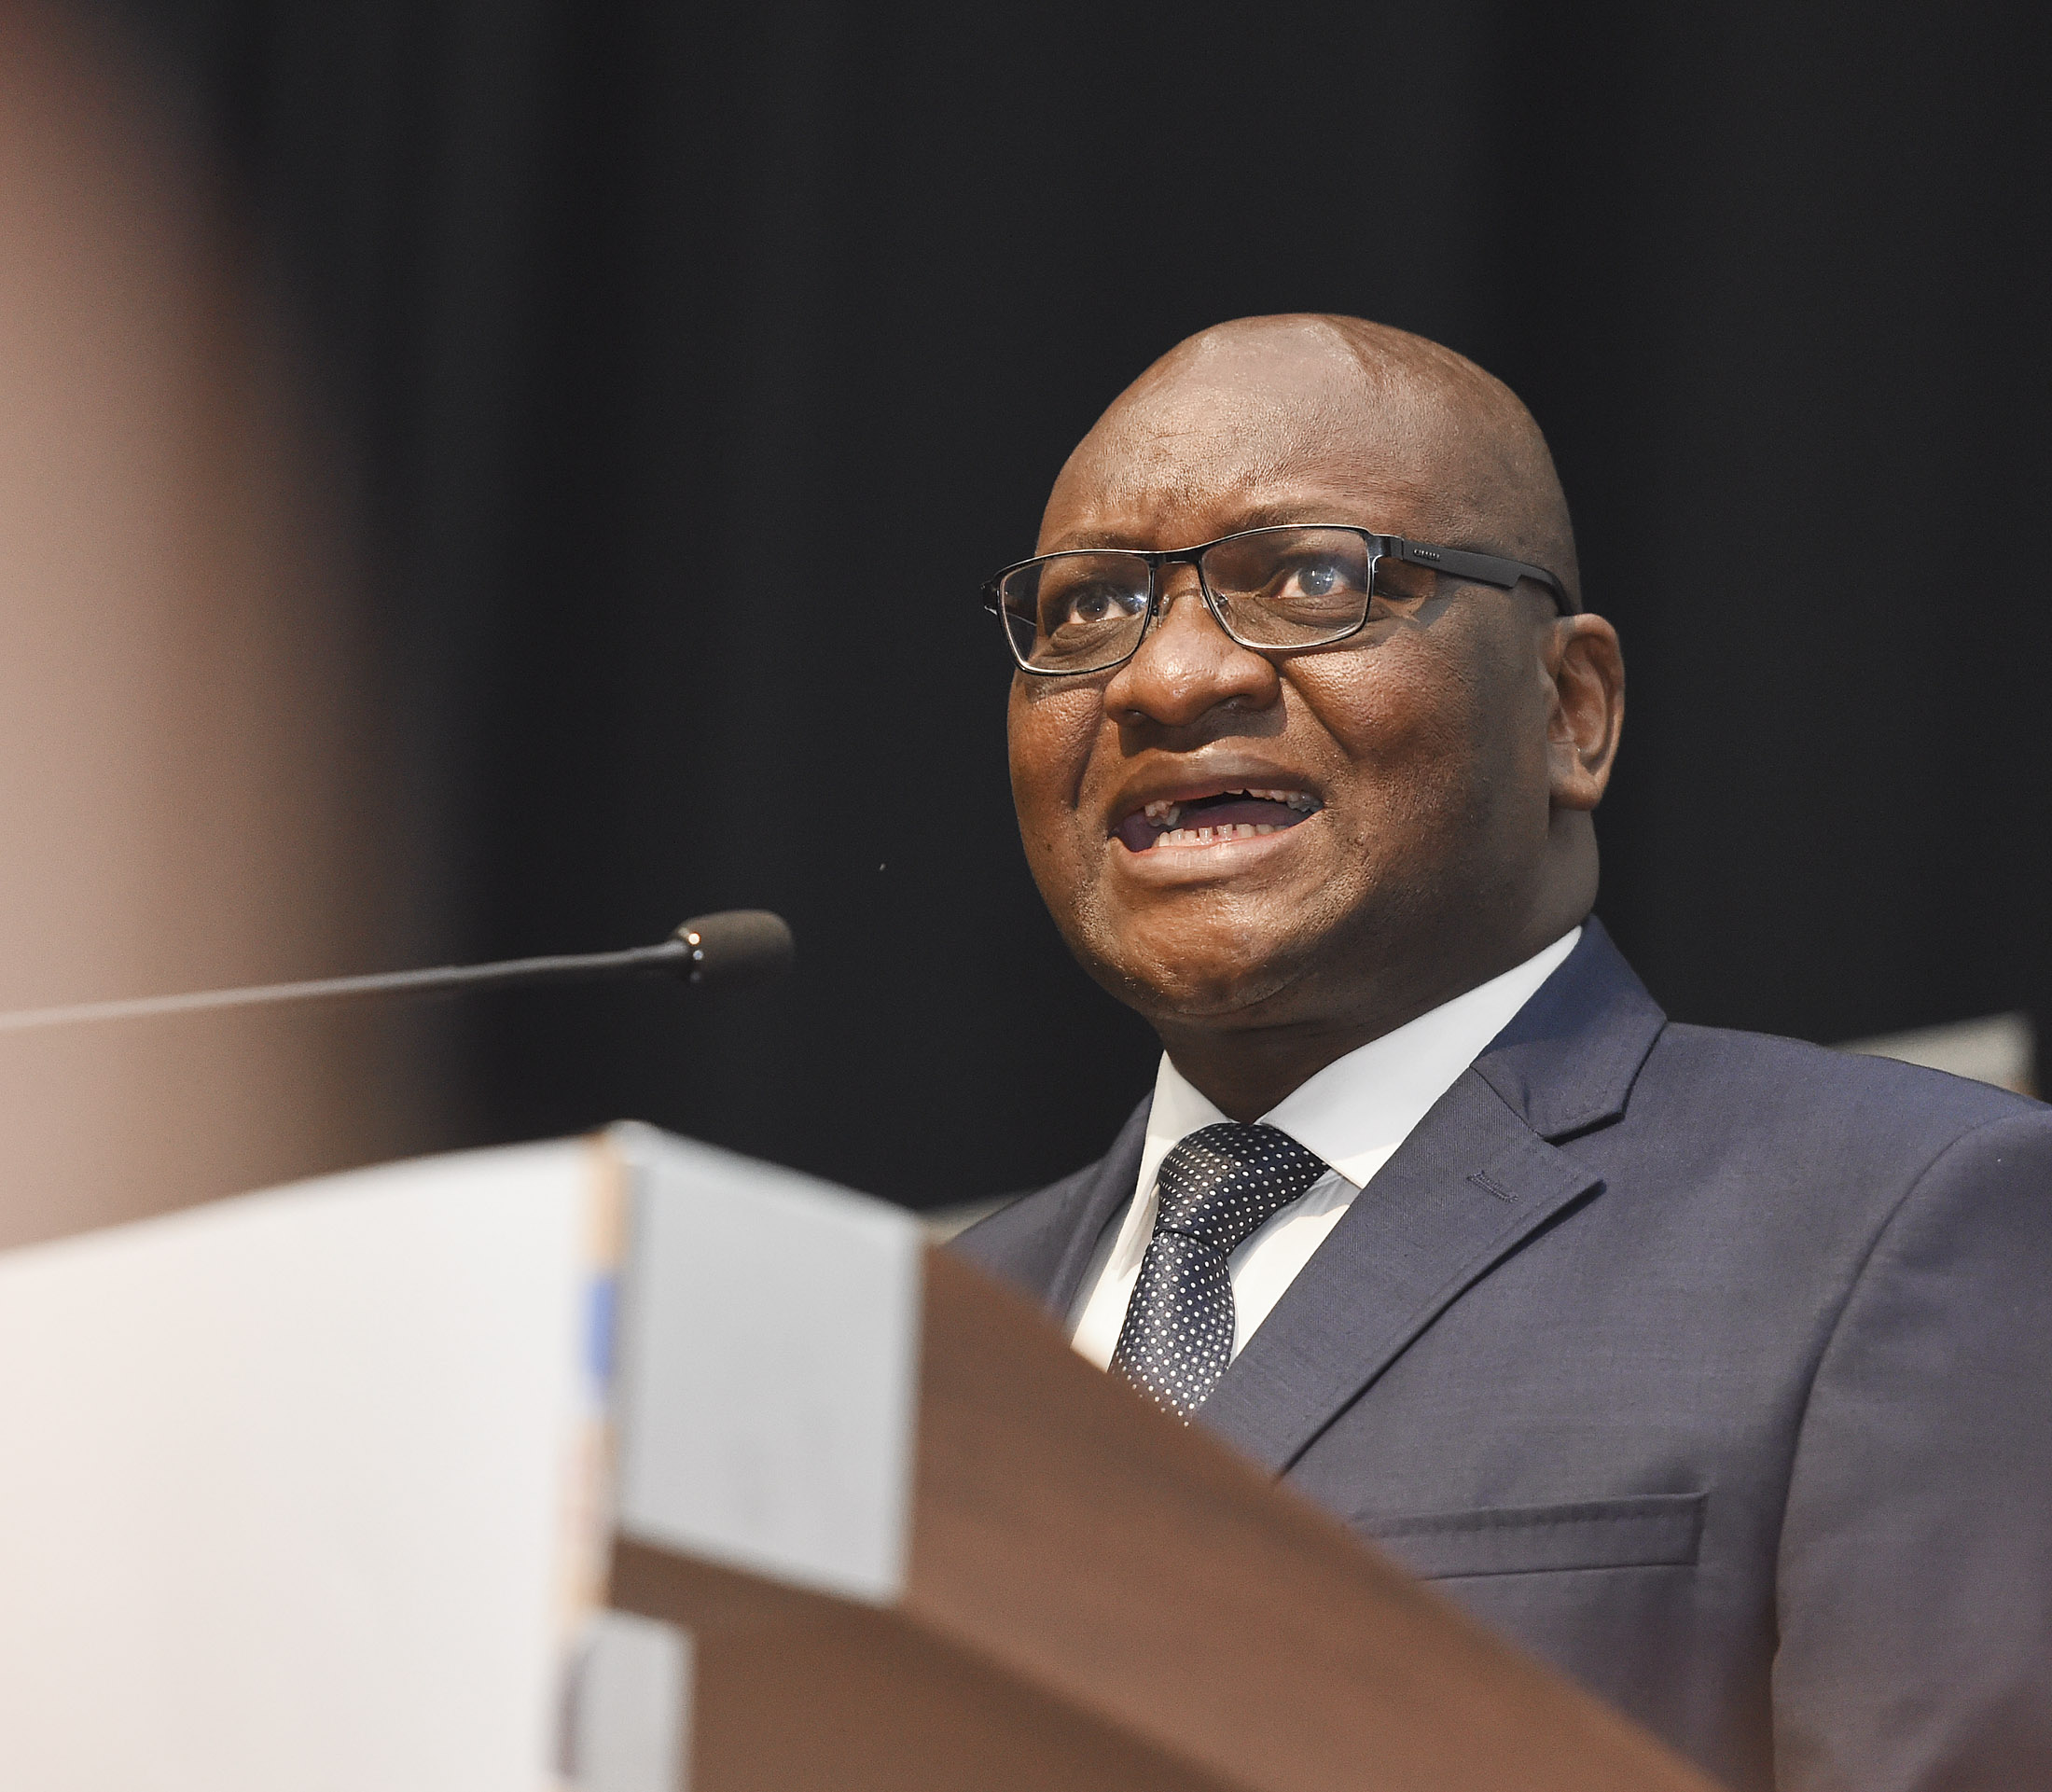 Speaking during a media briefing in Johannesburg, David Makhura urged residents to continue exercising COVID-19 health protocols.